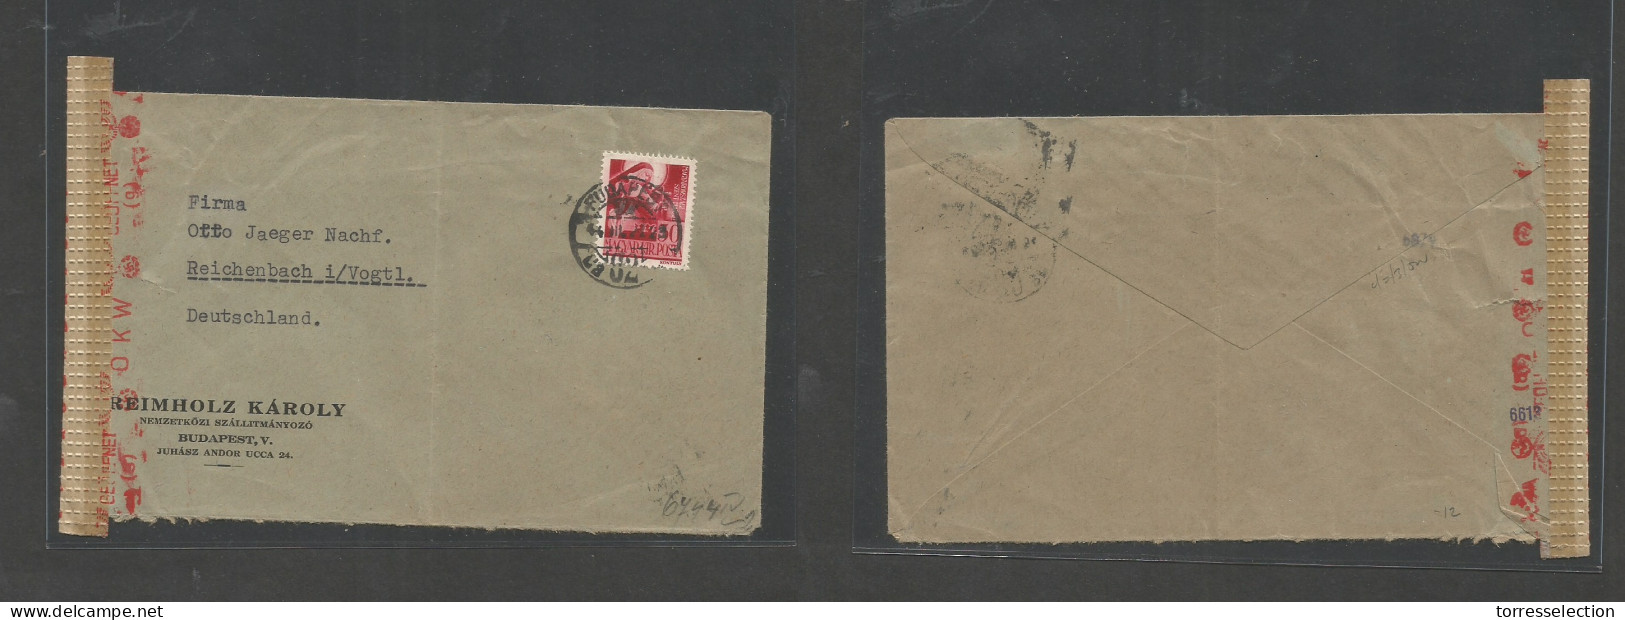 HUNGARY. 1944 (21 July) Budapest - Germany, Reichenbach. Comercial Fkd Single 30f Stamp, Nazi Censored Envelope. SALE. - Other & Unclassified